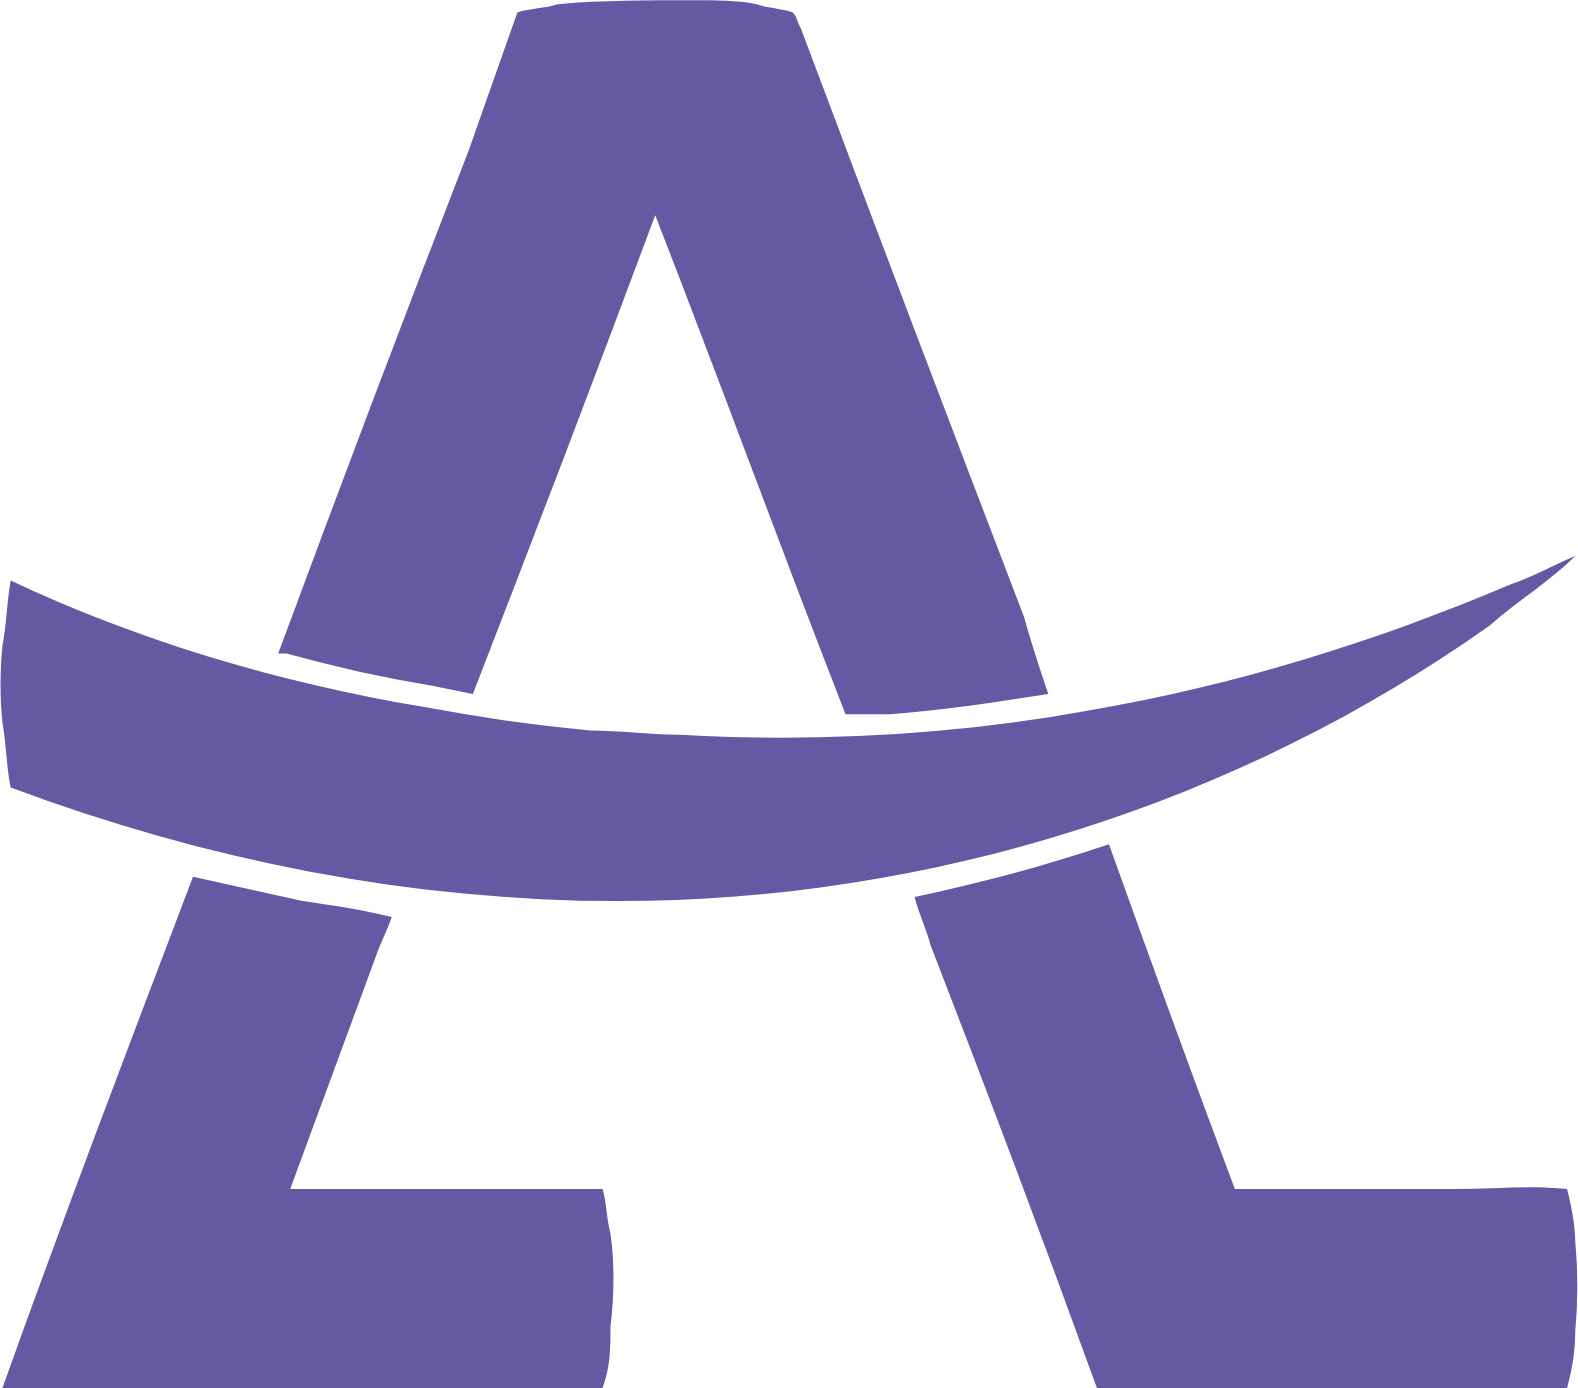 Arabian Contracting Services Company logo (PNG transparent)